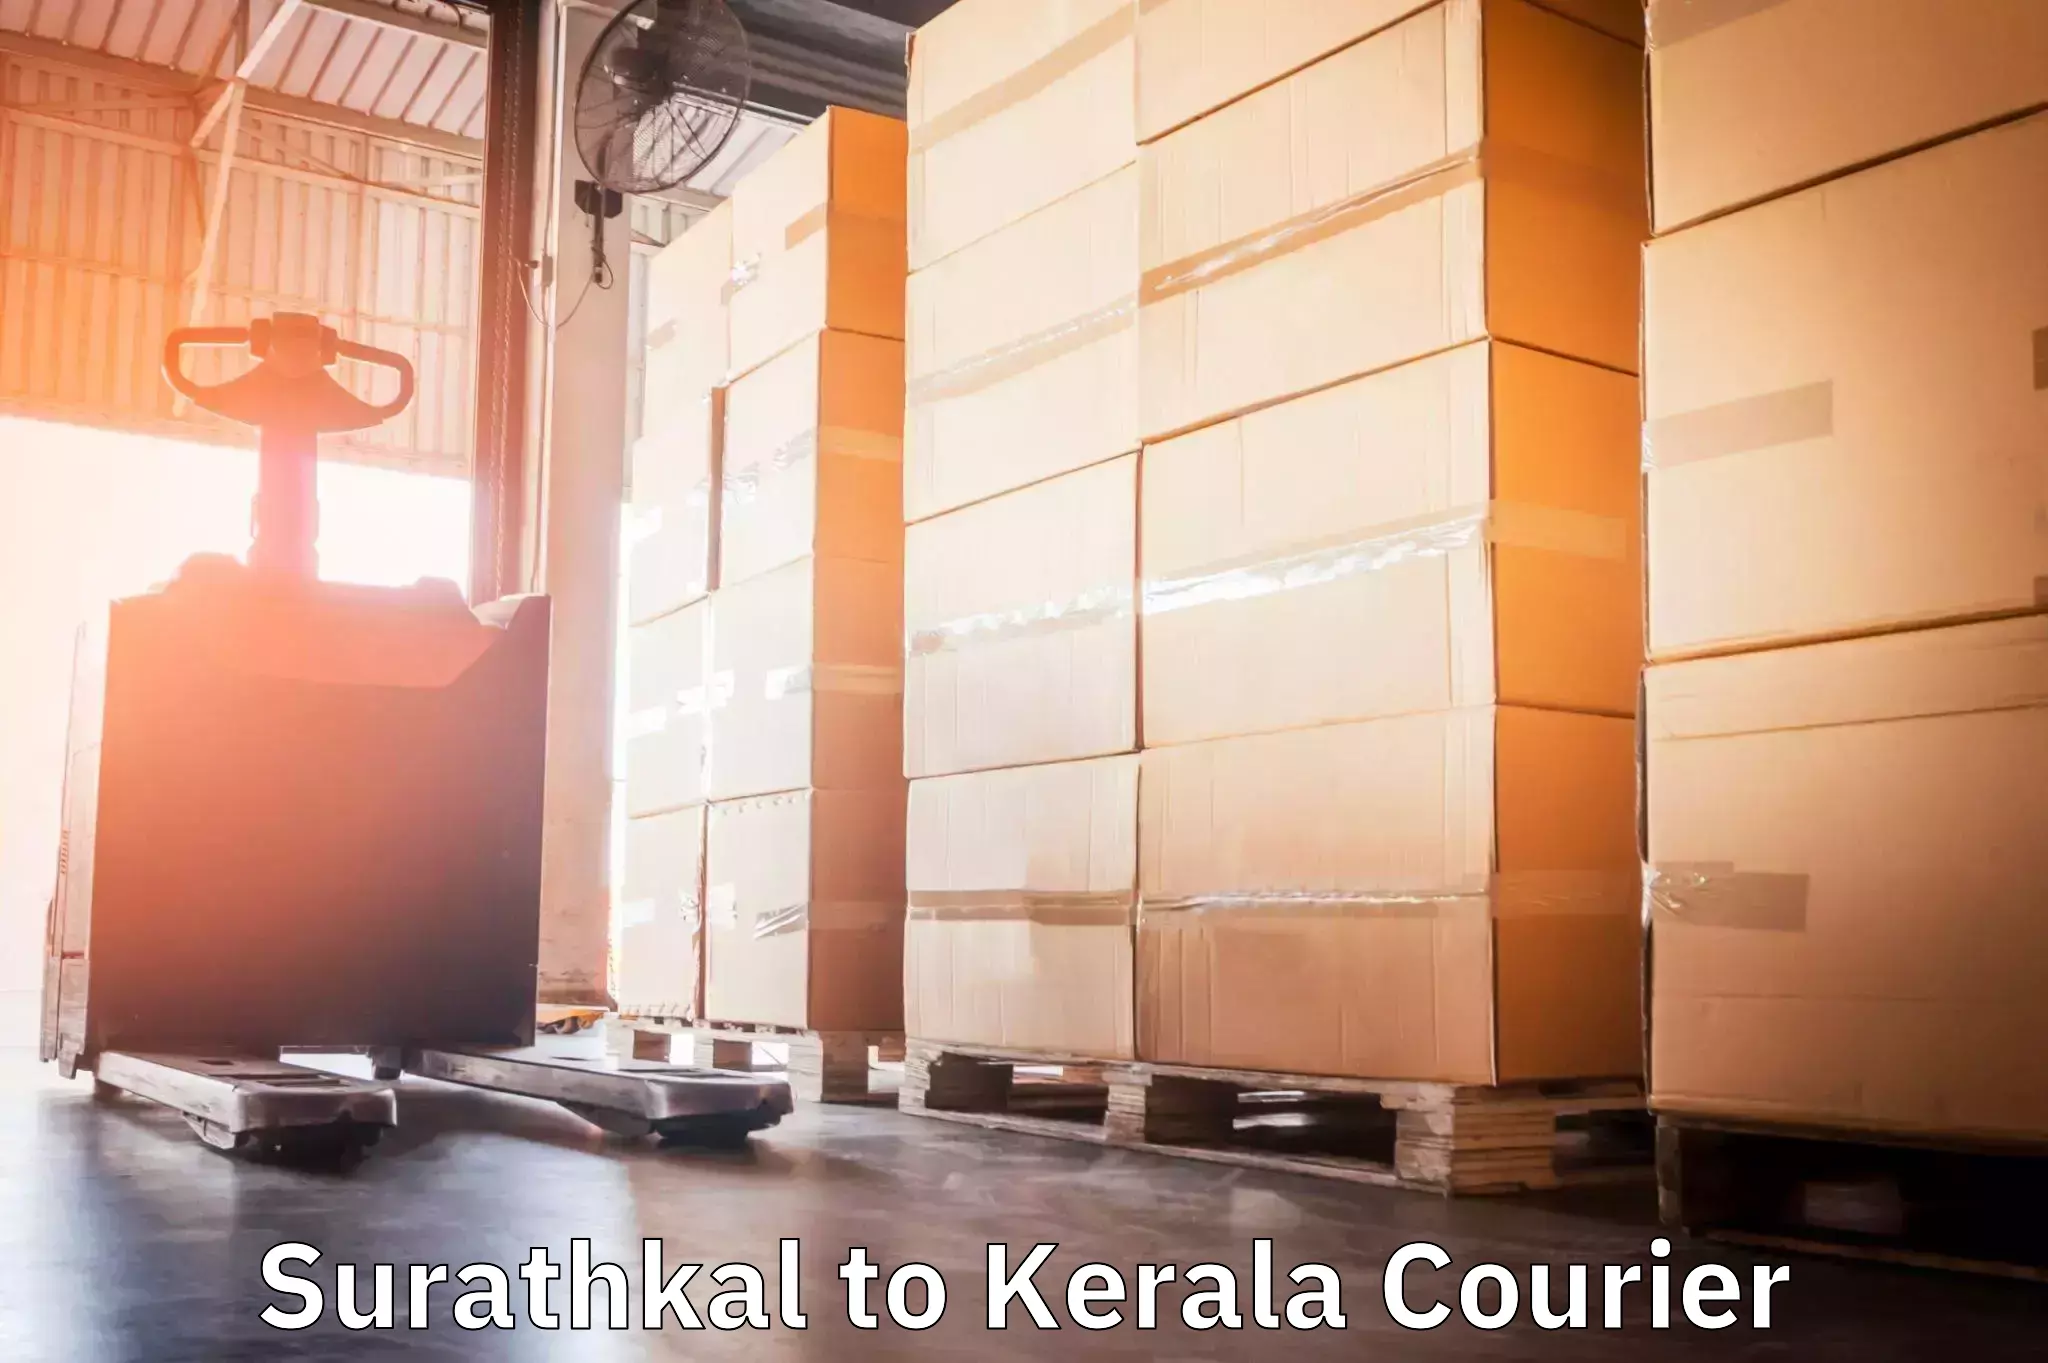 Advanced package delivery Surathkal to Cochin Port Kochi